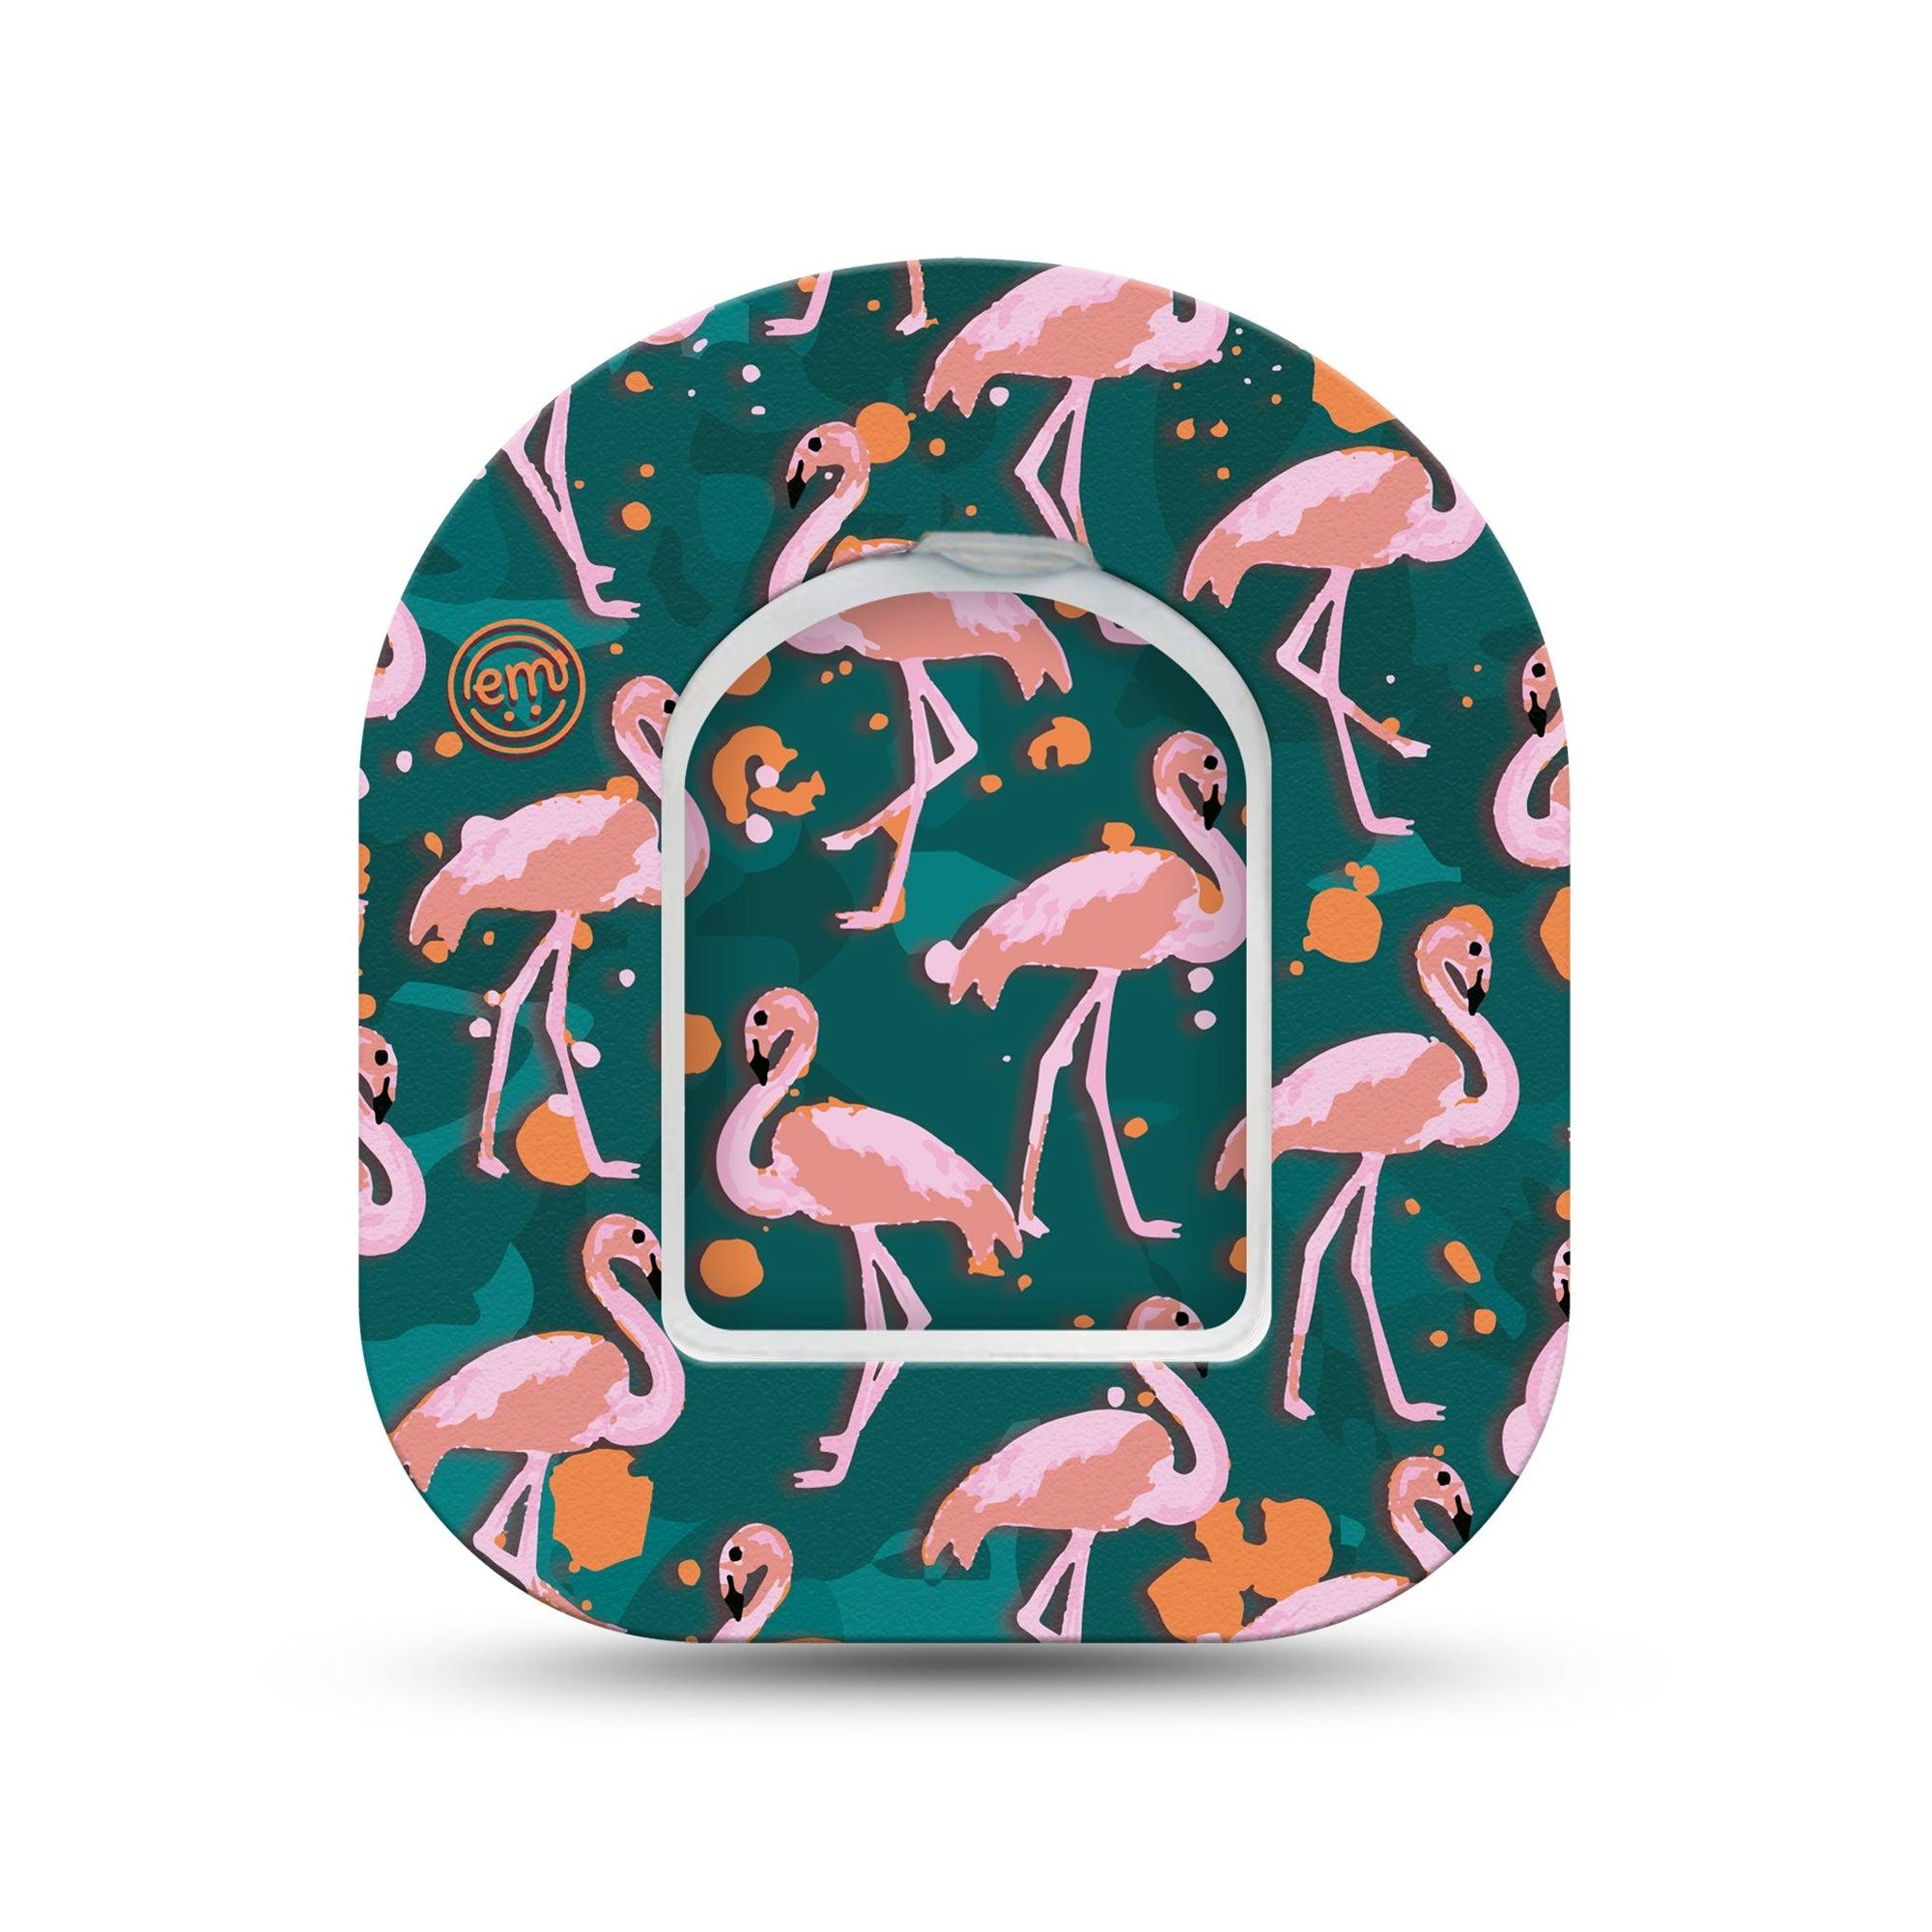 ExpressionMed Flamingos Omnipod Surface Center Sticker and Mini Tape Flamingo Party Themed Vinyl Sticker and Tape Design Pump Design